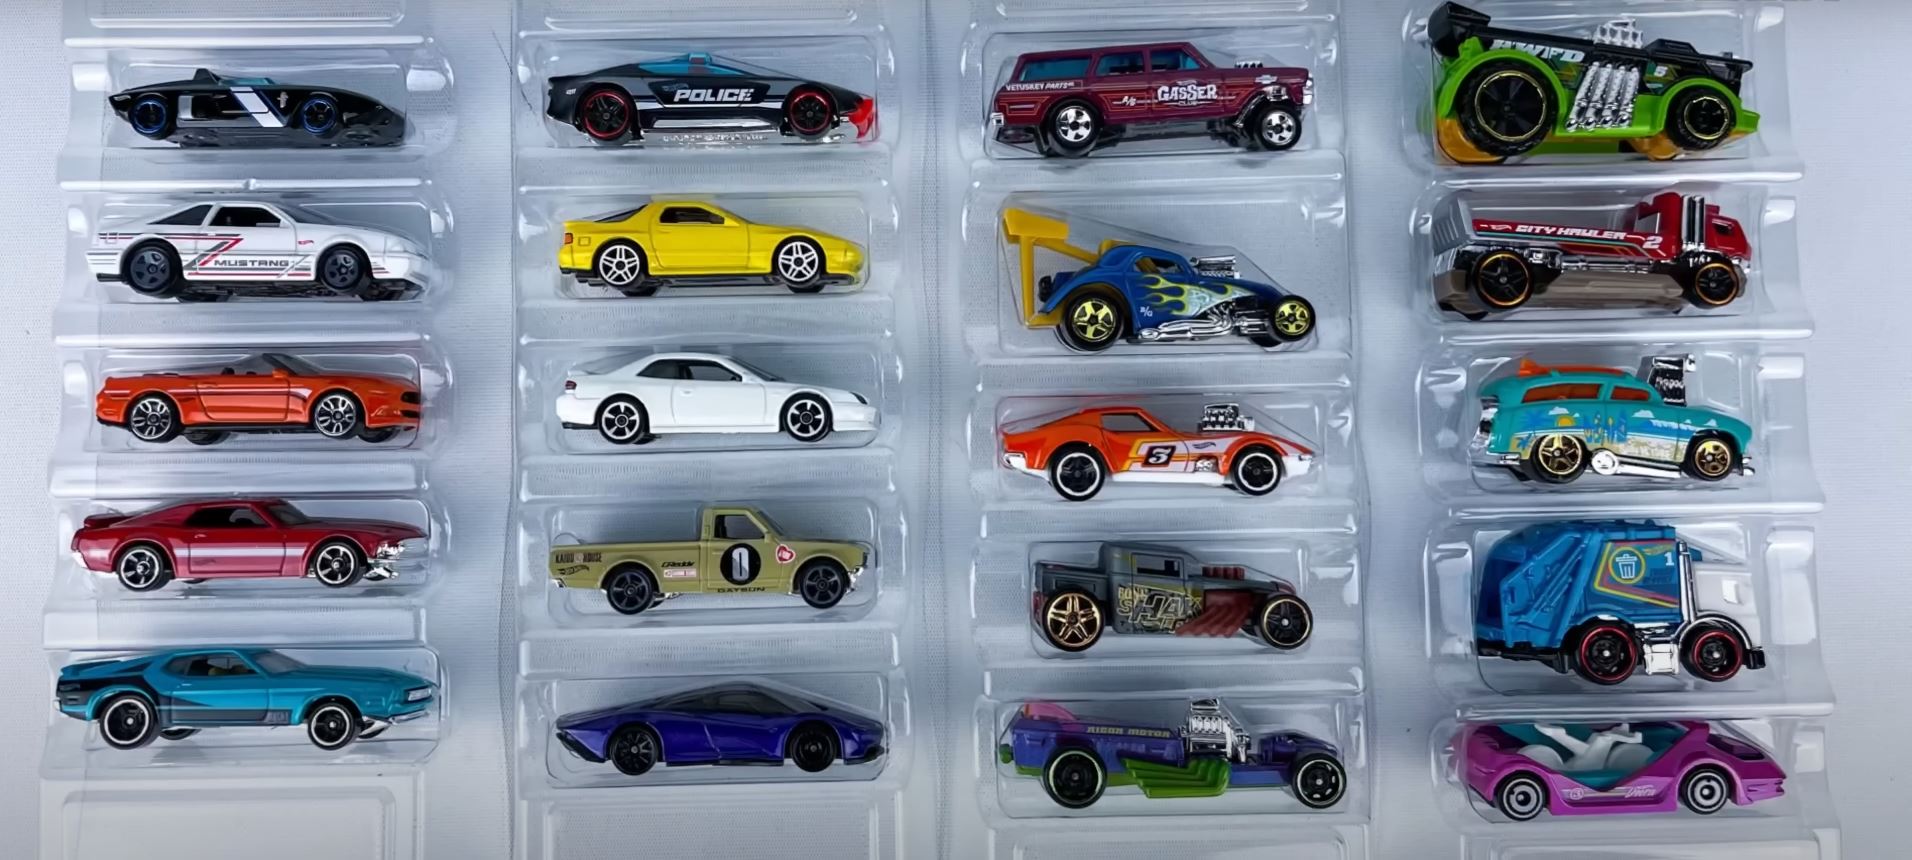 https://s1.cdn.autoevolution.com/images/news/hot-wheels-celebrates-the-ford-mustang-with-a-new-5-pack-there-are-more-surprises-still-194510_1.jpg